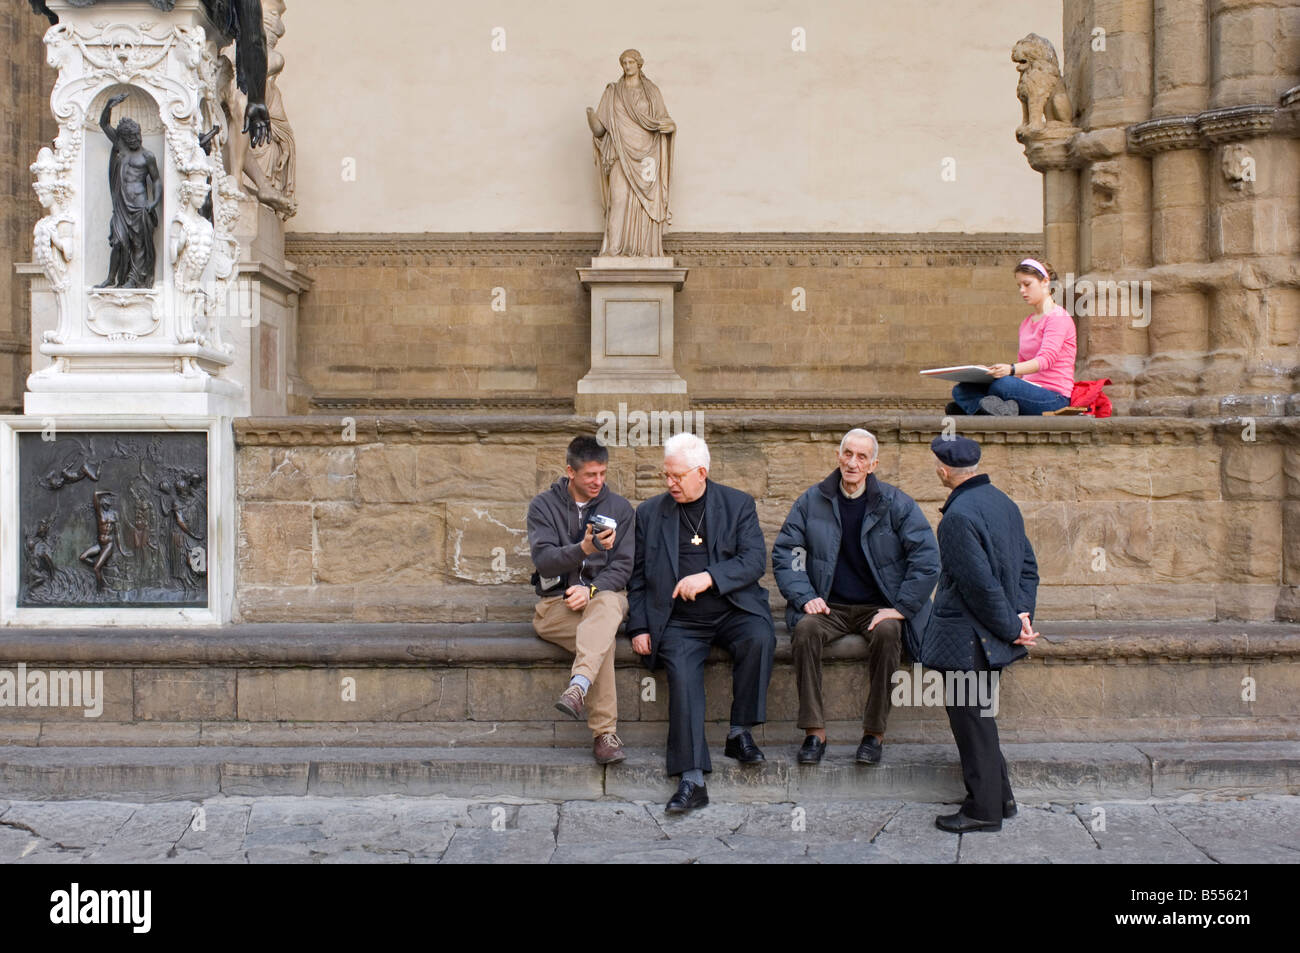 A group of men chat while an artist paints from the Loggia dei Lanzi gallery on the Piazza della Signoria in Florence. Stock Photo